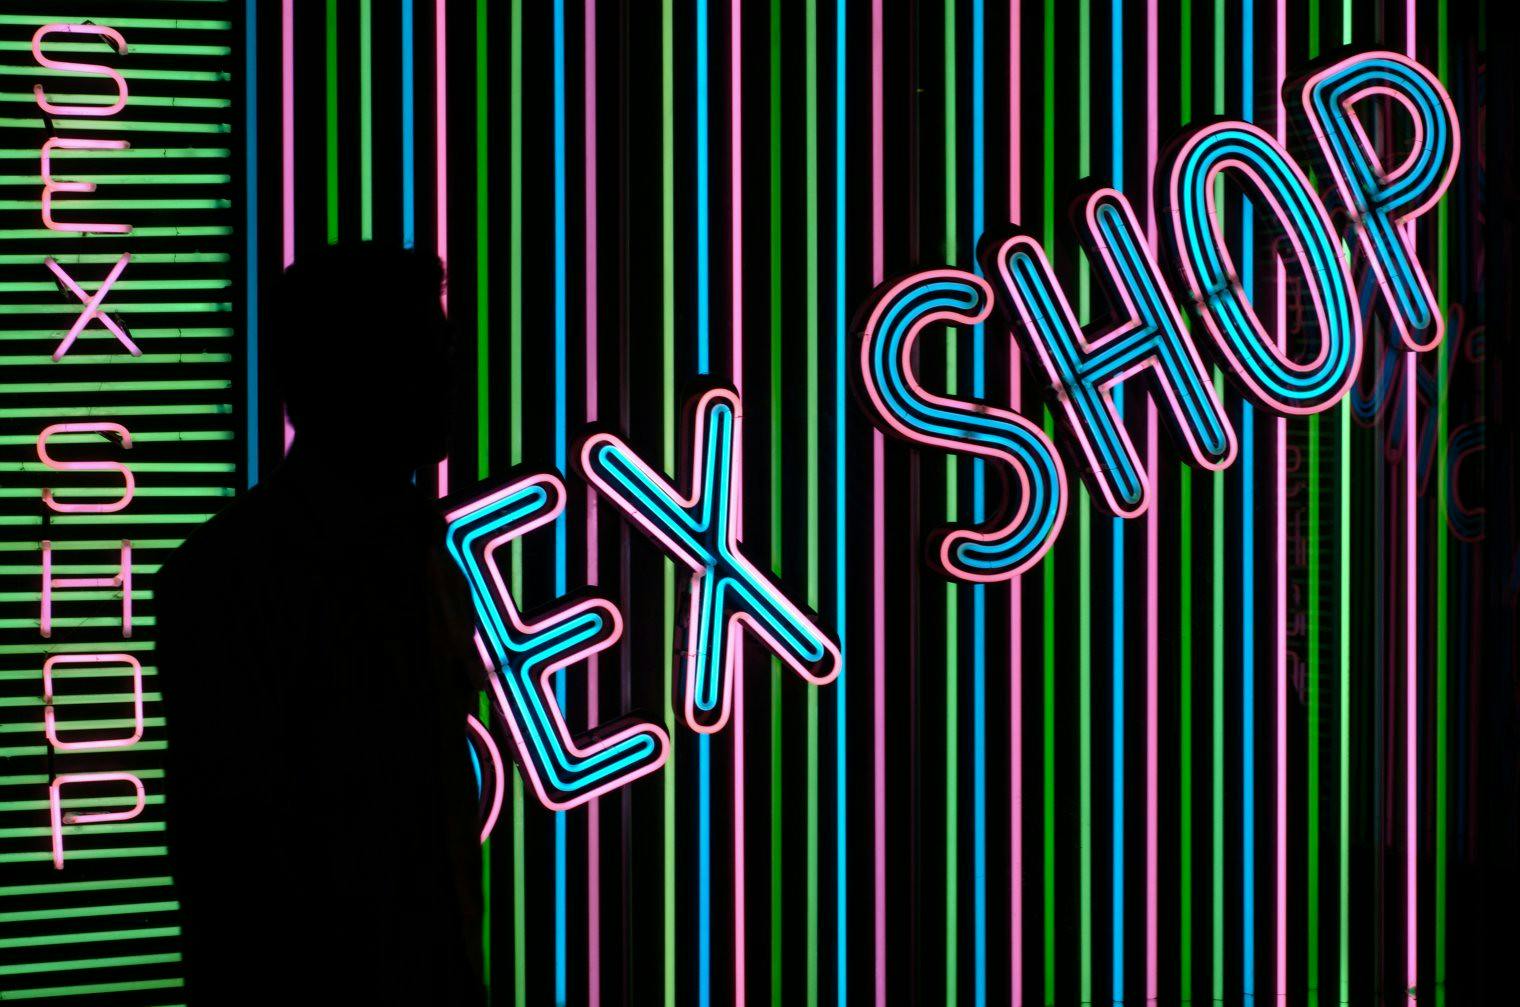 A silhouette stands next to a 'sex shop' sign